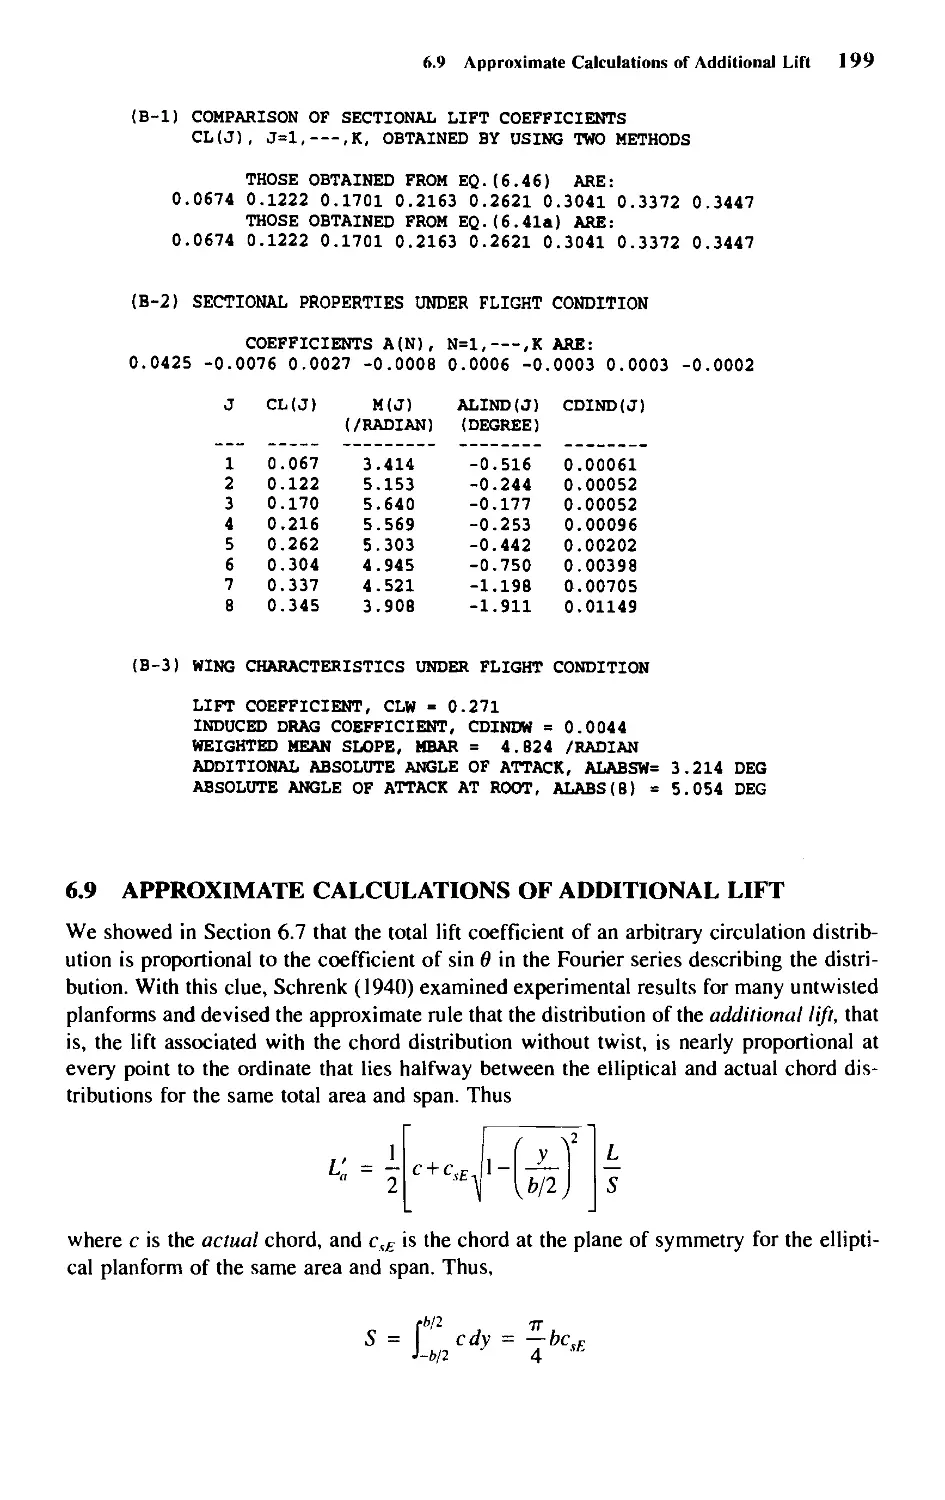 6.9 - Approximate Calculations of Additional Lift